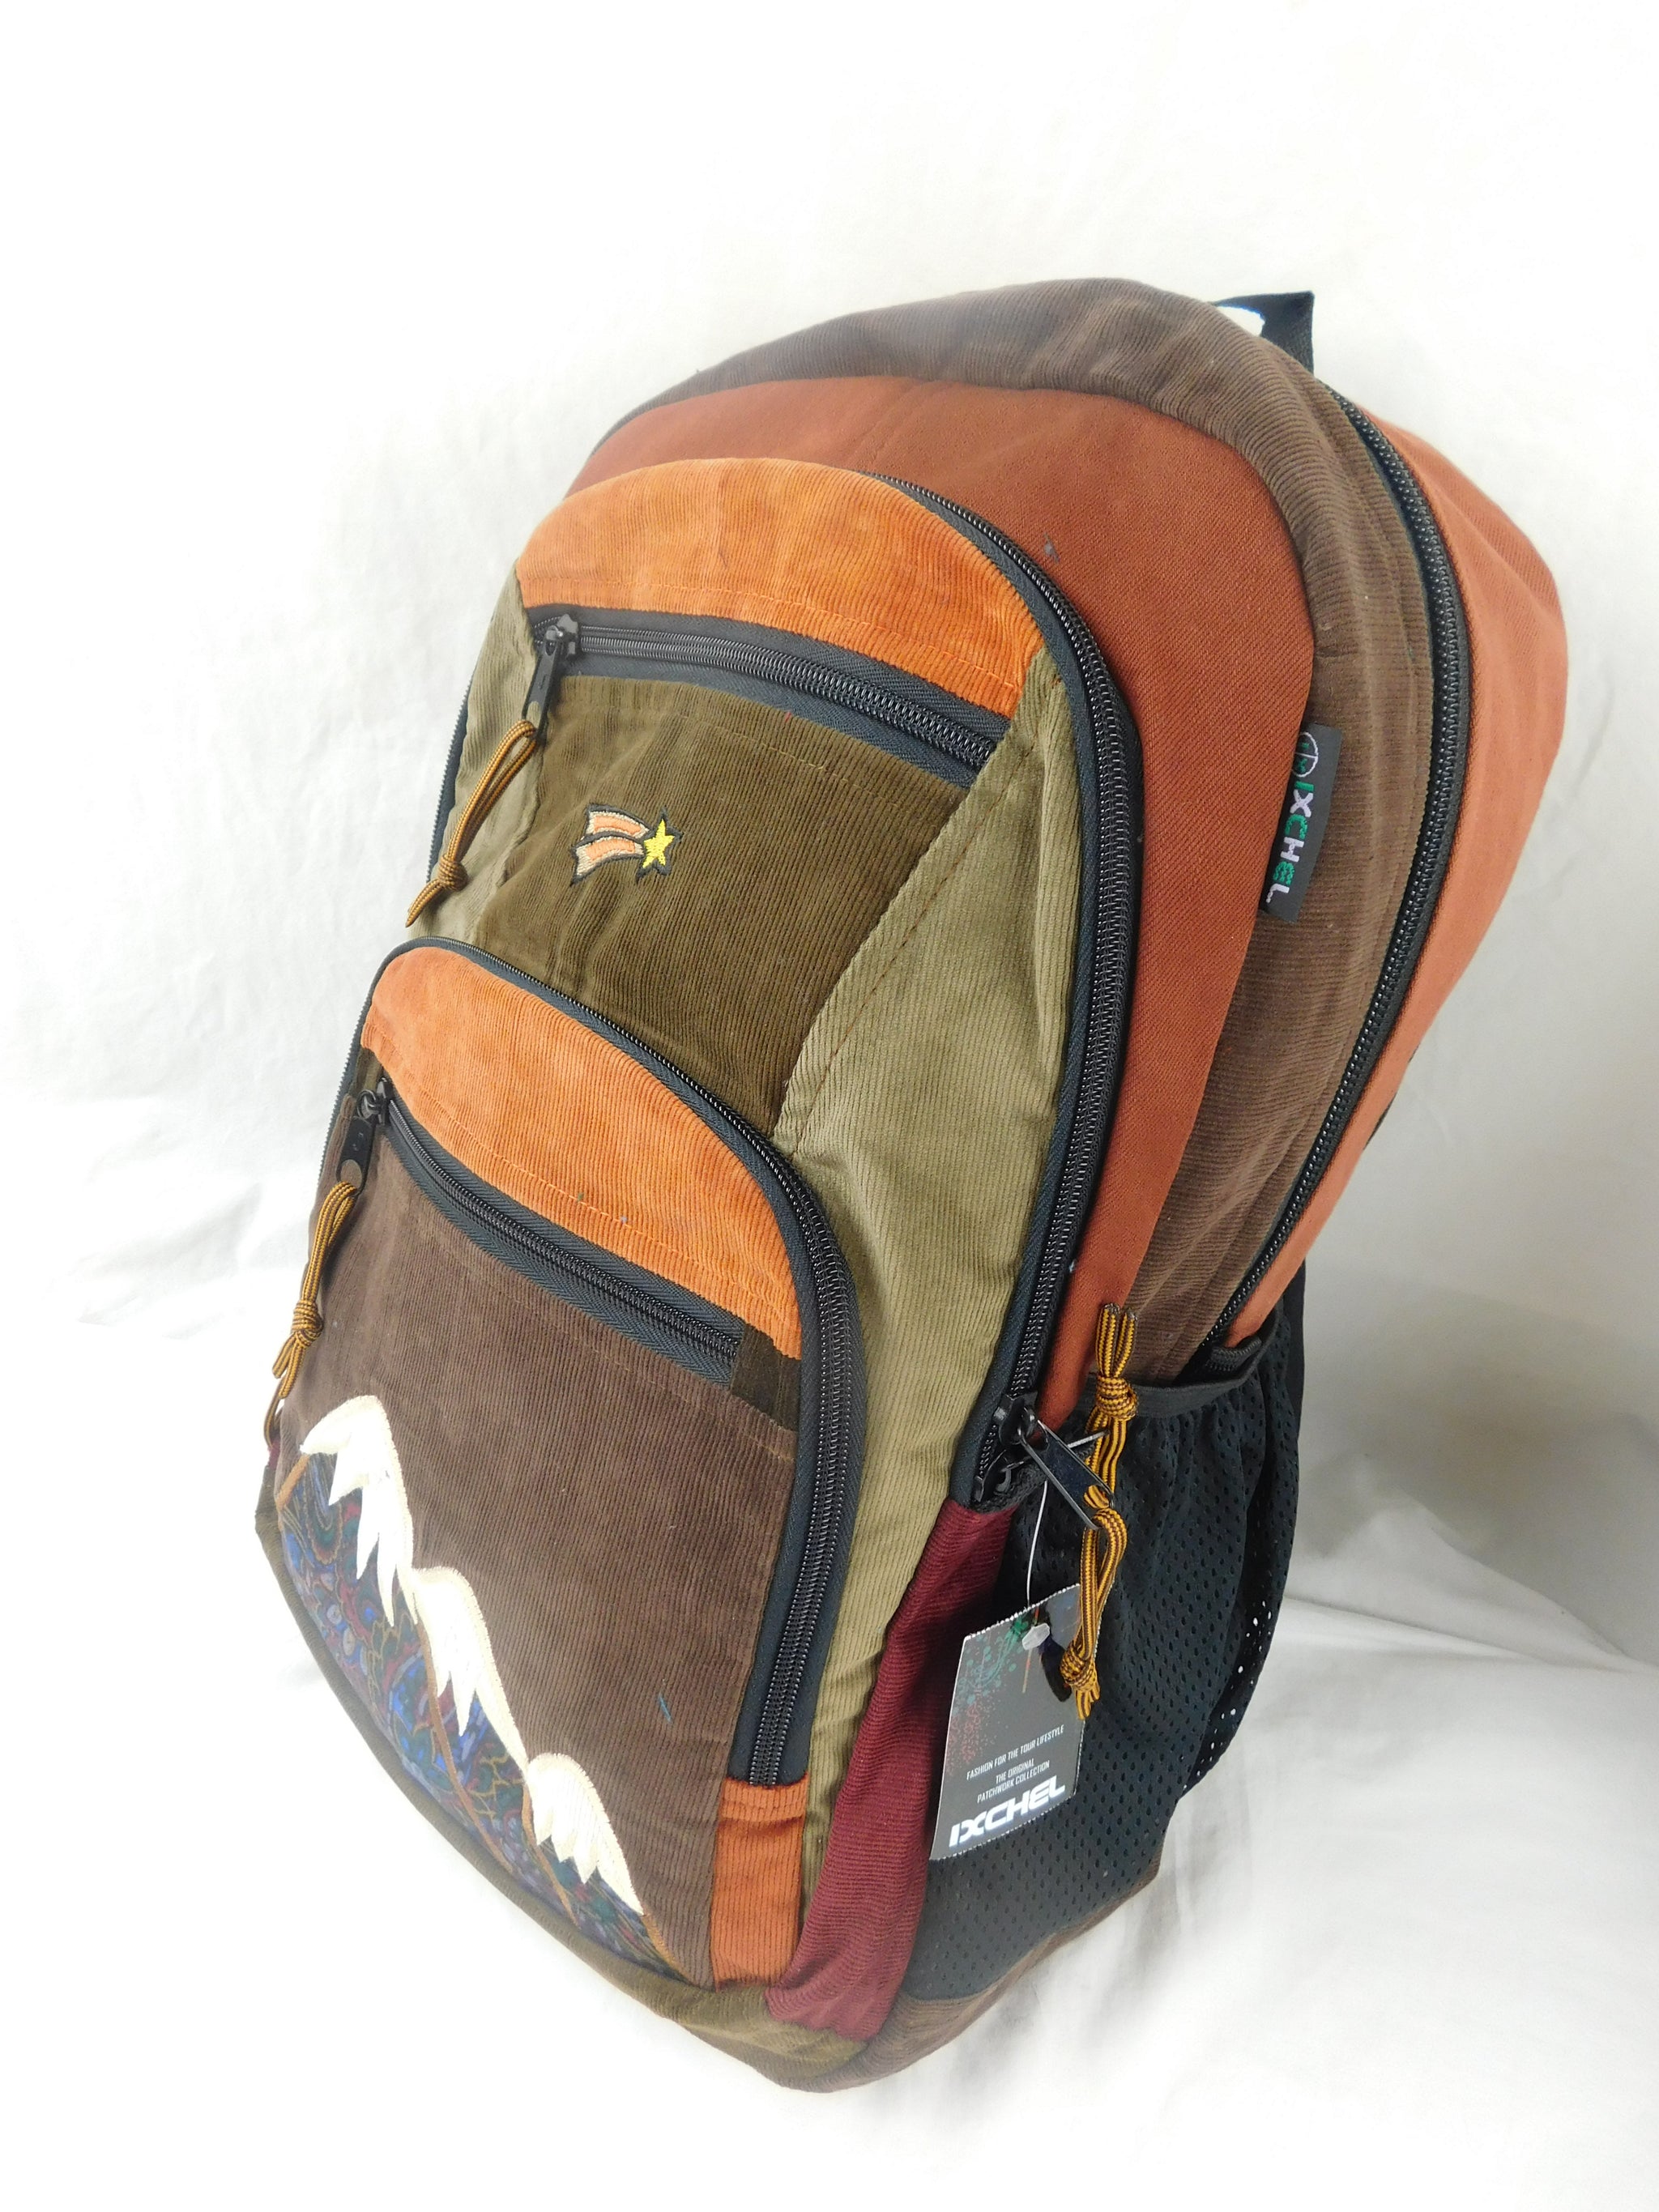 Patchwork Corduroy Backpack with Mountain Applique (Large)